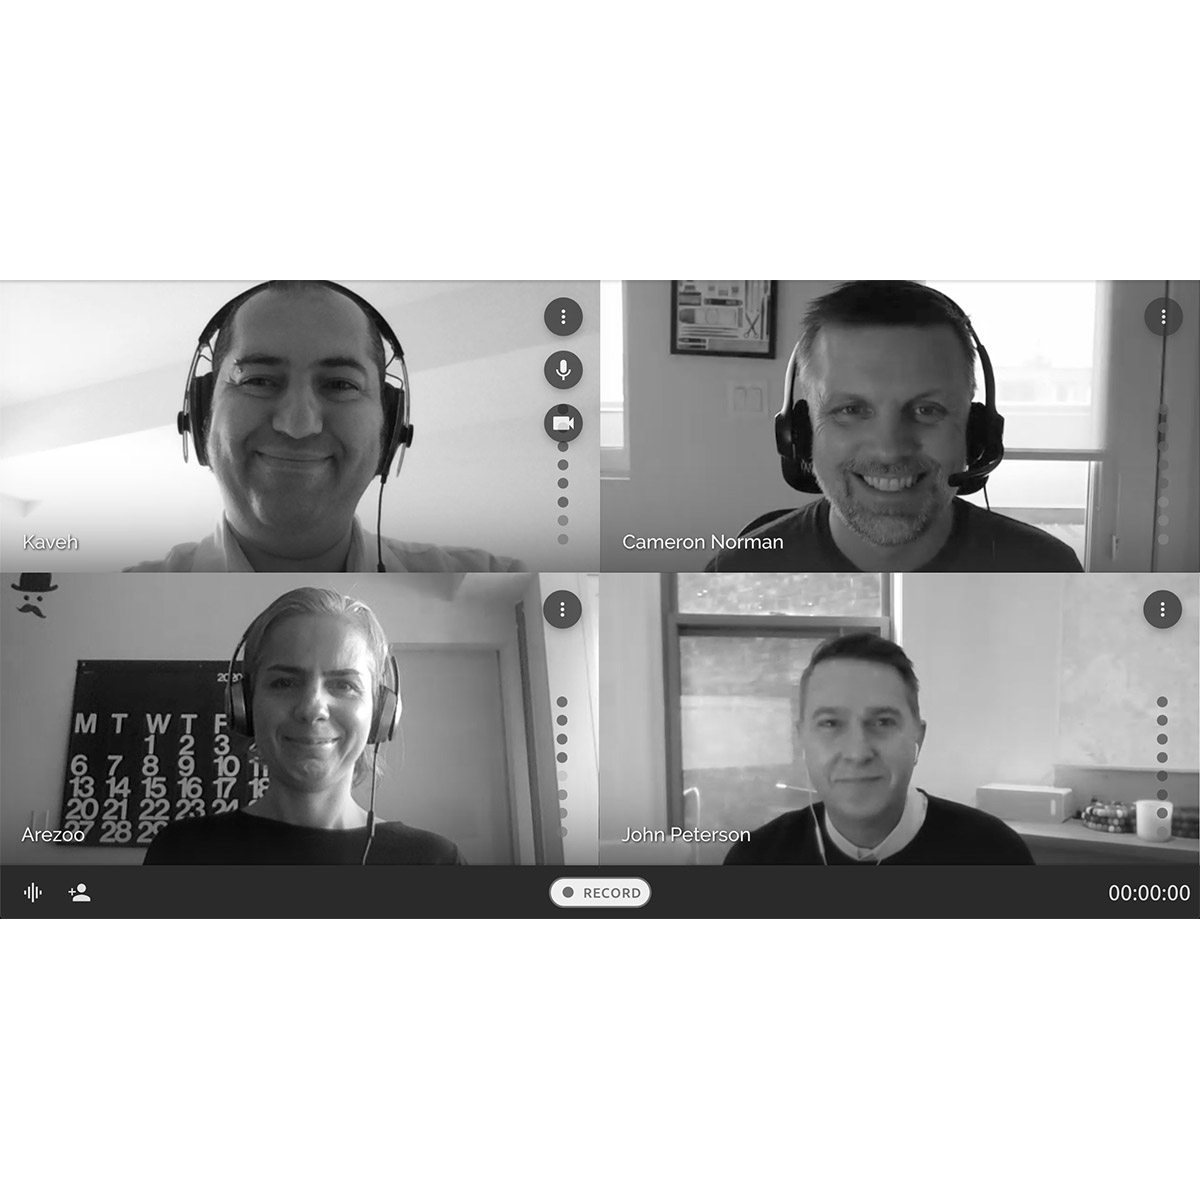 Print Screen of the Video Conference